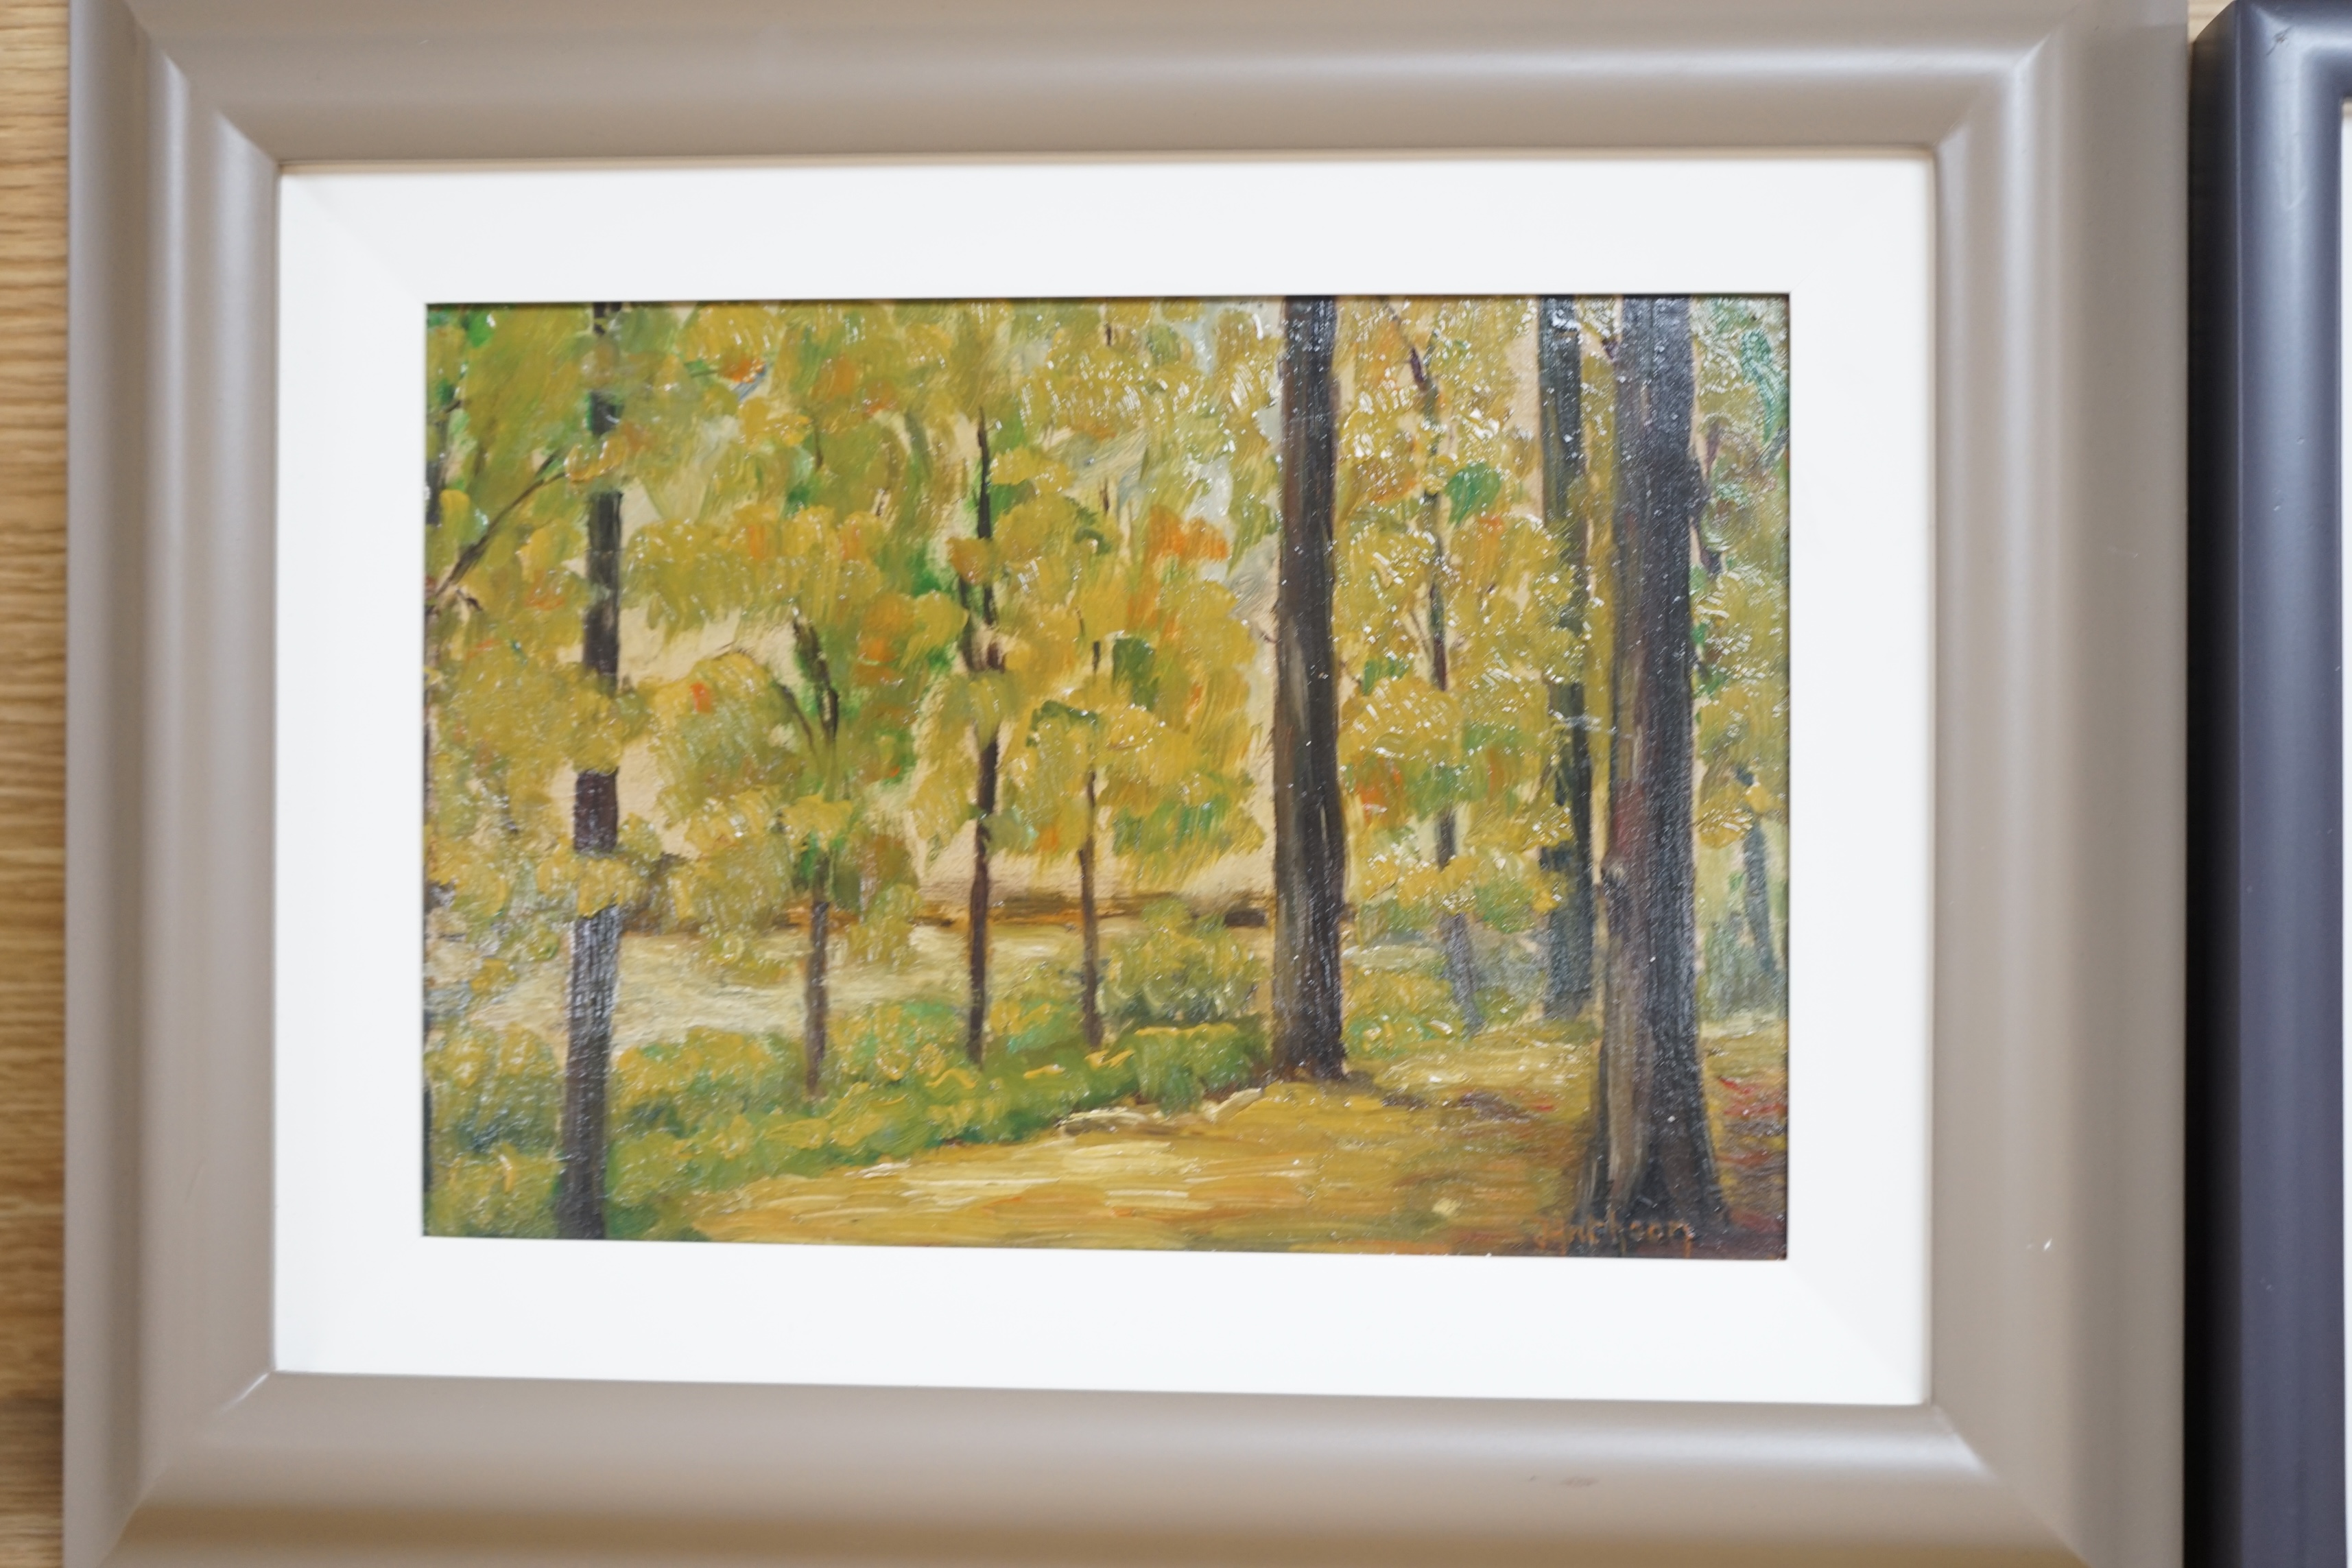 Three contemporary oils on board, Woodland scenes, one signed with initials P.H, 16 x 23cm. Condition - good